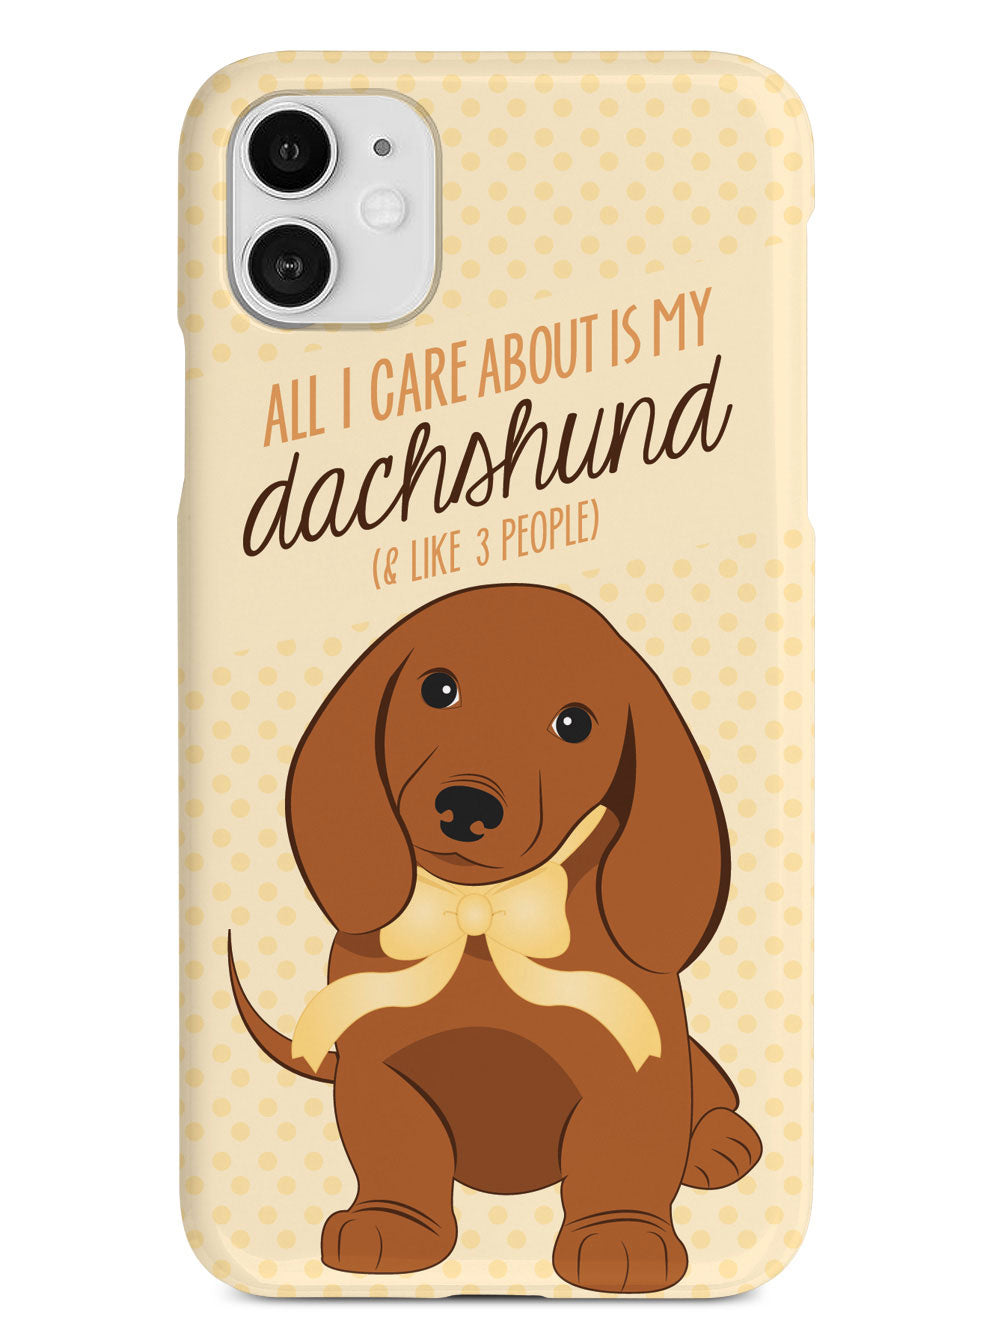 All I Care About is My Dachshund Case